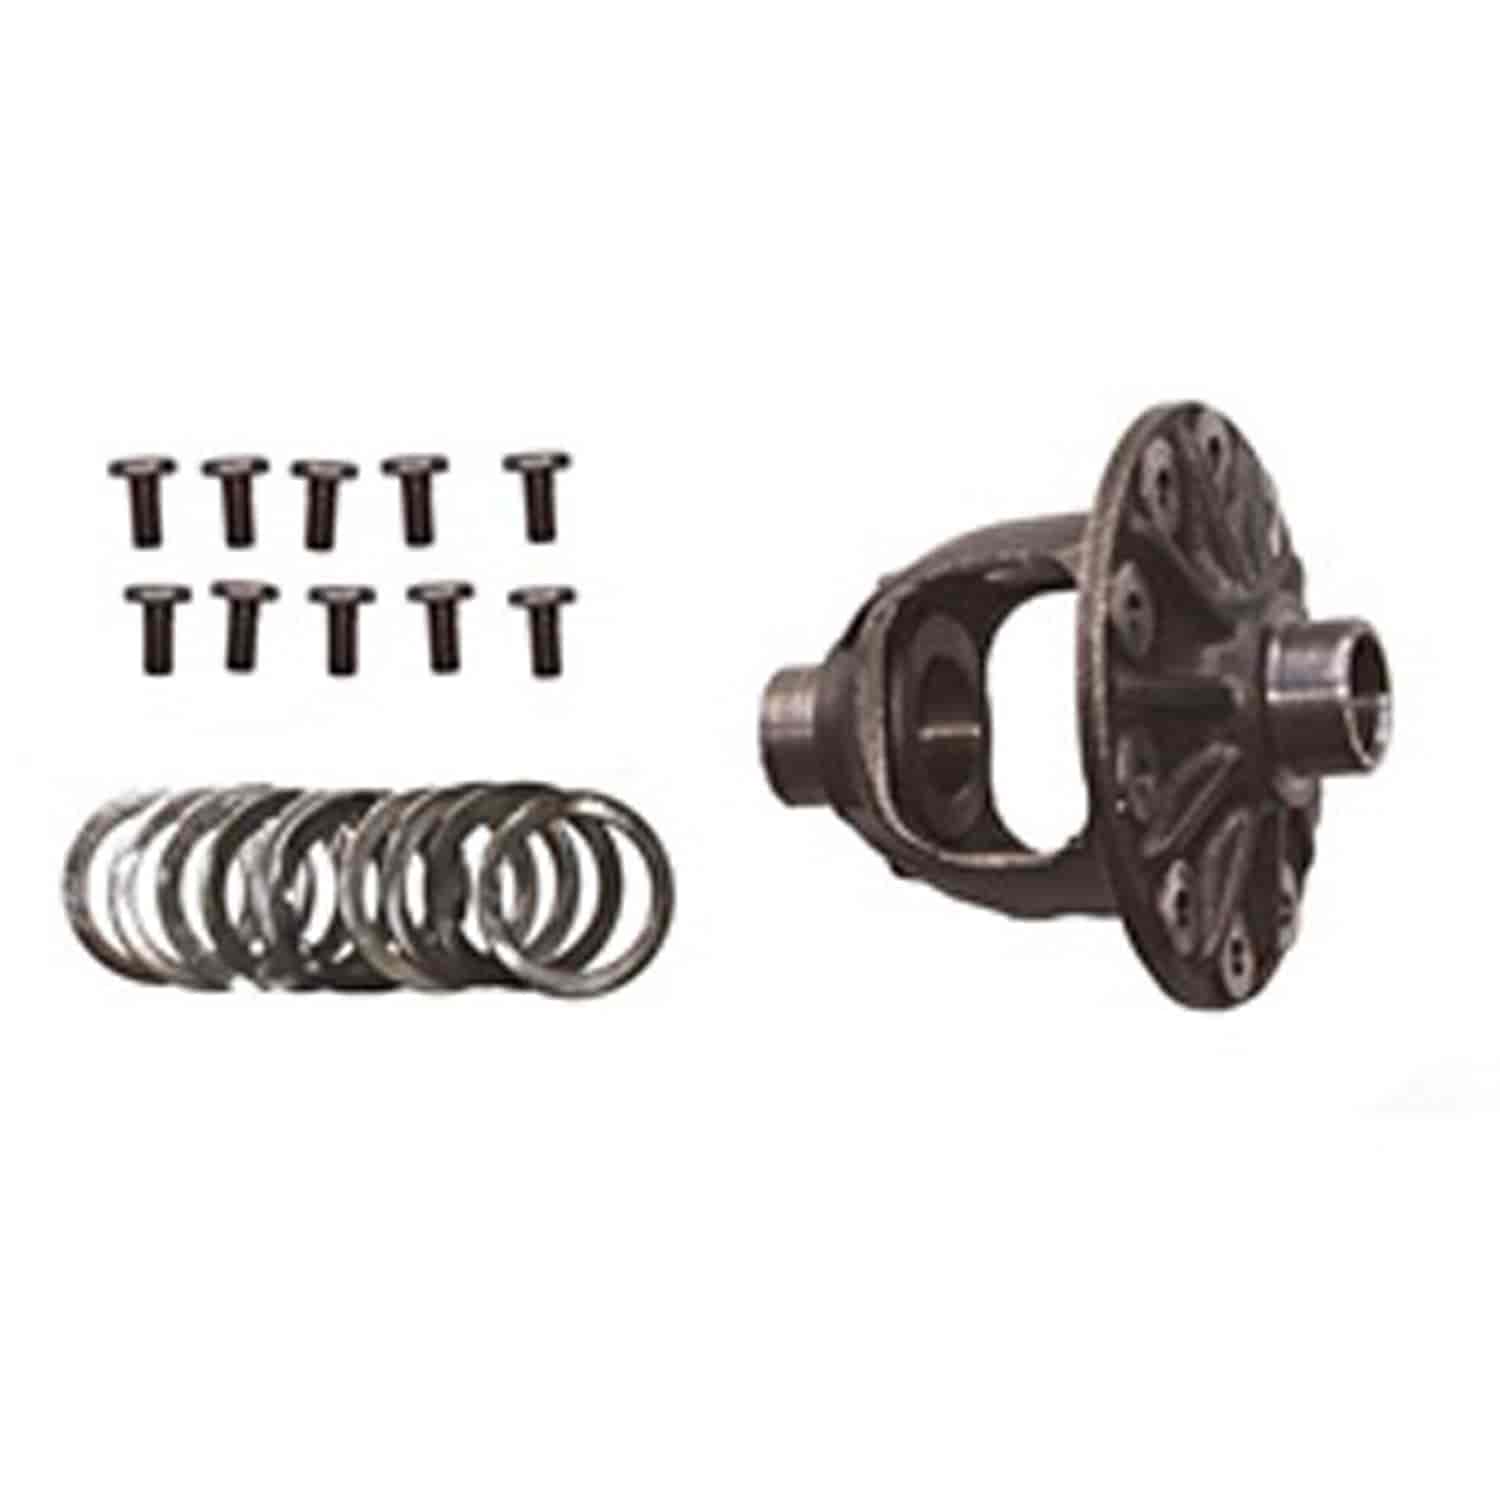 This differential carrier from Omix-ADA fits 99-04 Jeep Grand Cherokee WJ with Dana Super 30 Vari-Lo